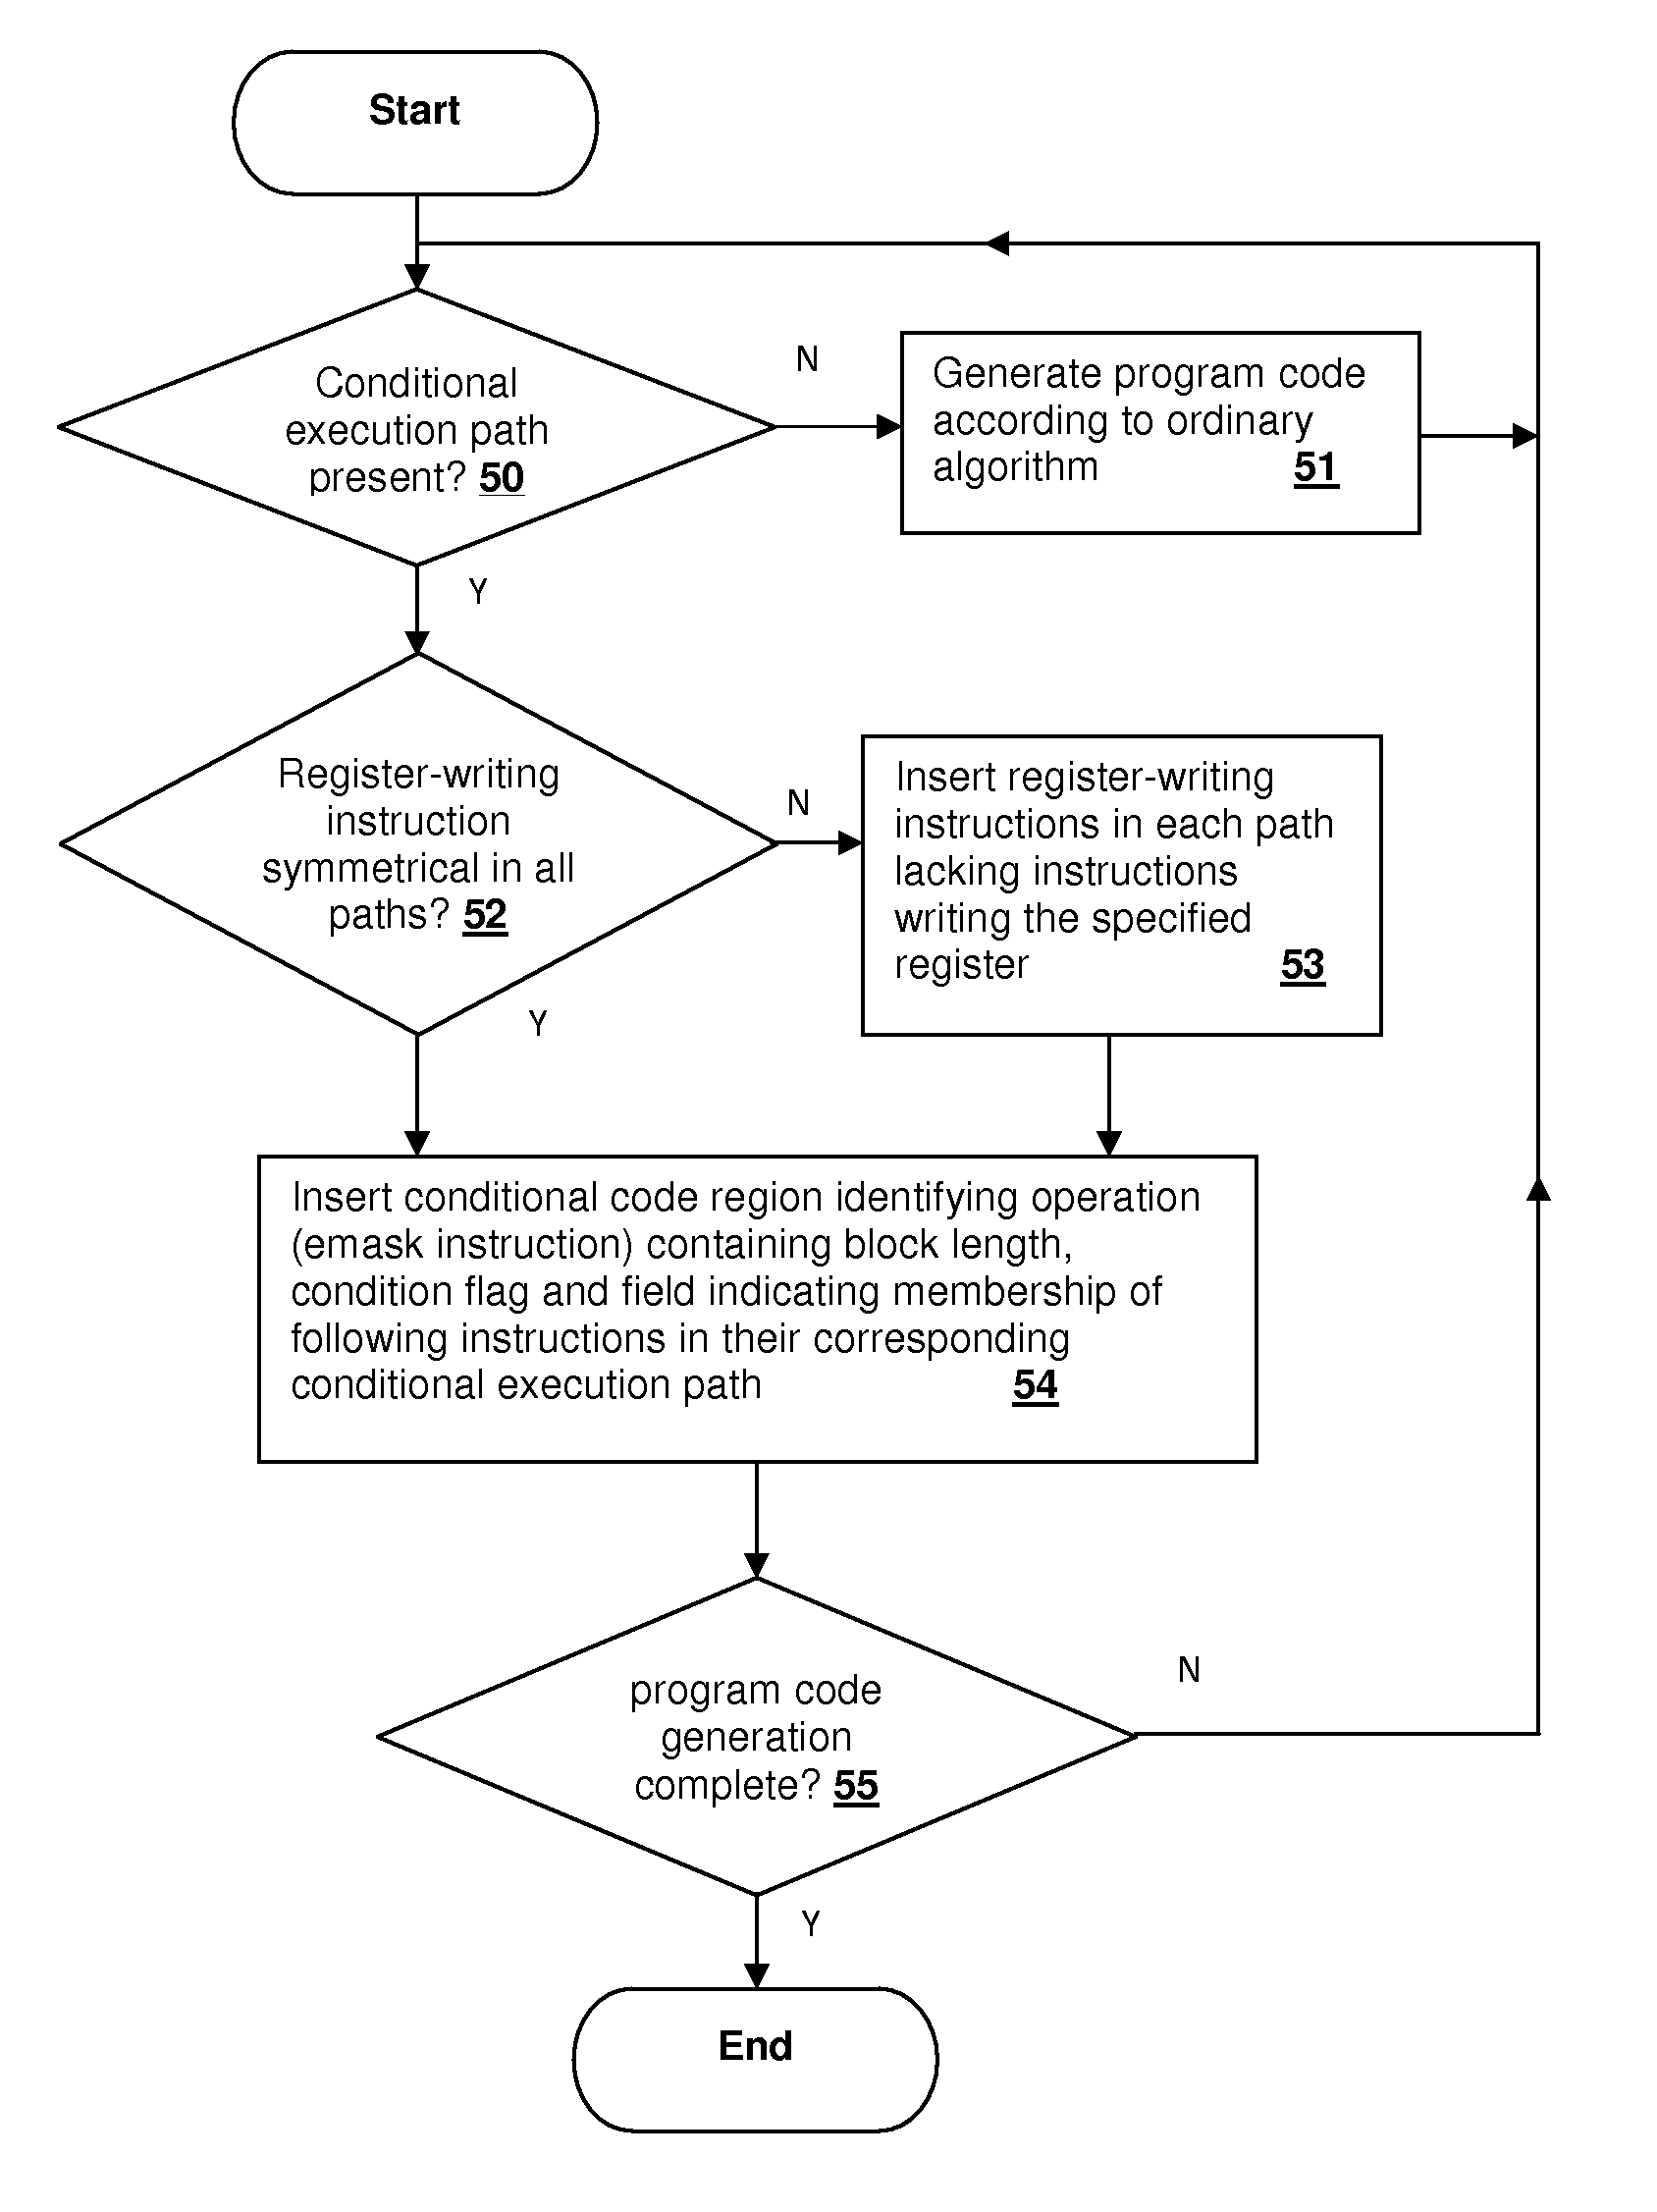 Predication supporting code generation by indicating path associations of symmetrically placed write instructions